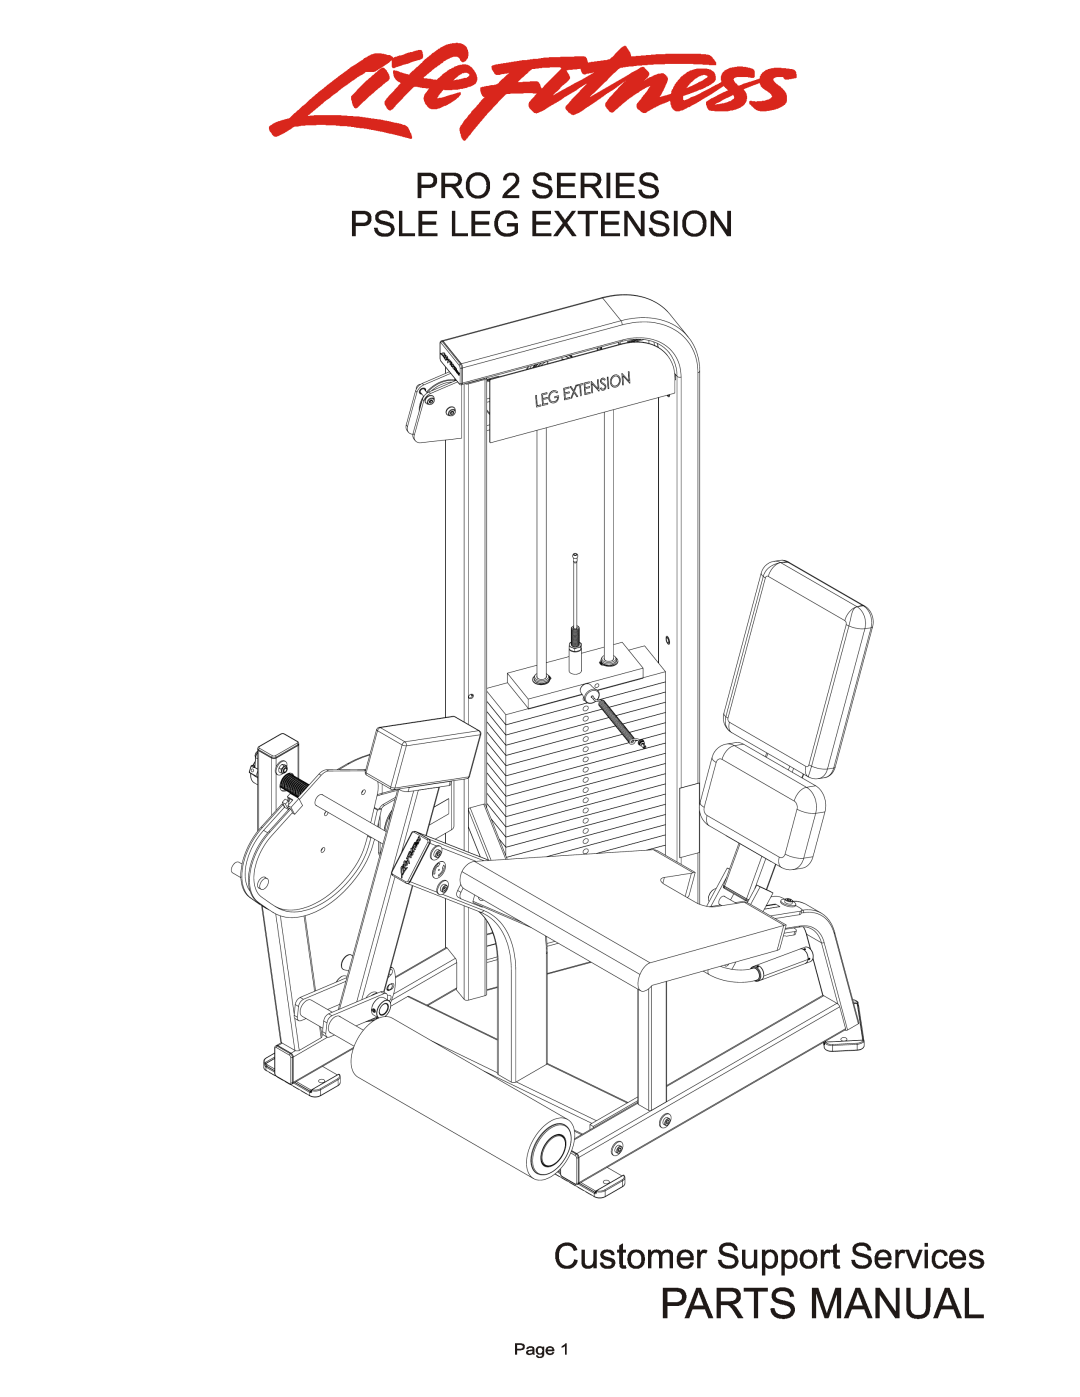 Life Fitness manual Parts Manual, PRO 2 SERIES PSLE LEG EXTENSION Customer Support Services, Page 